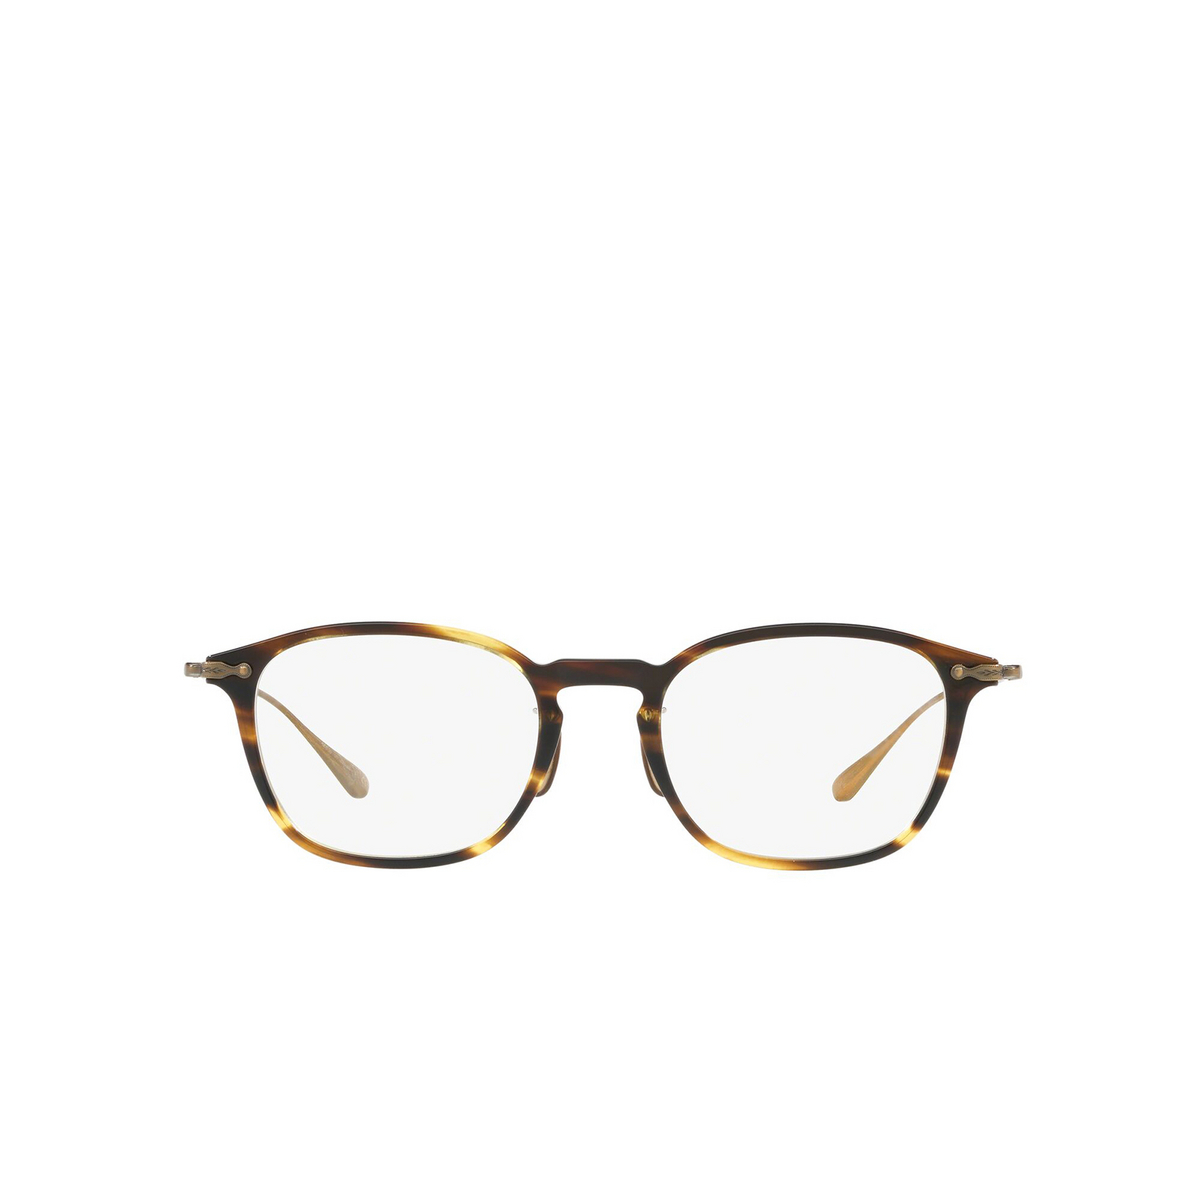 Oliver Peoples WINNET Eyeglasses 1003 Cocobolo - front view